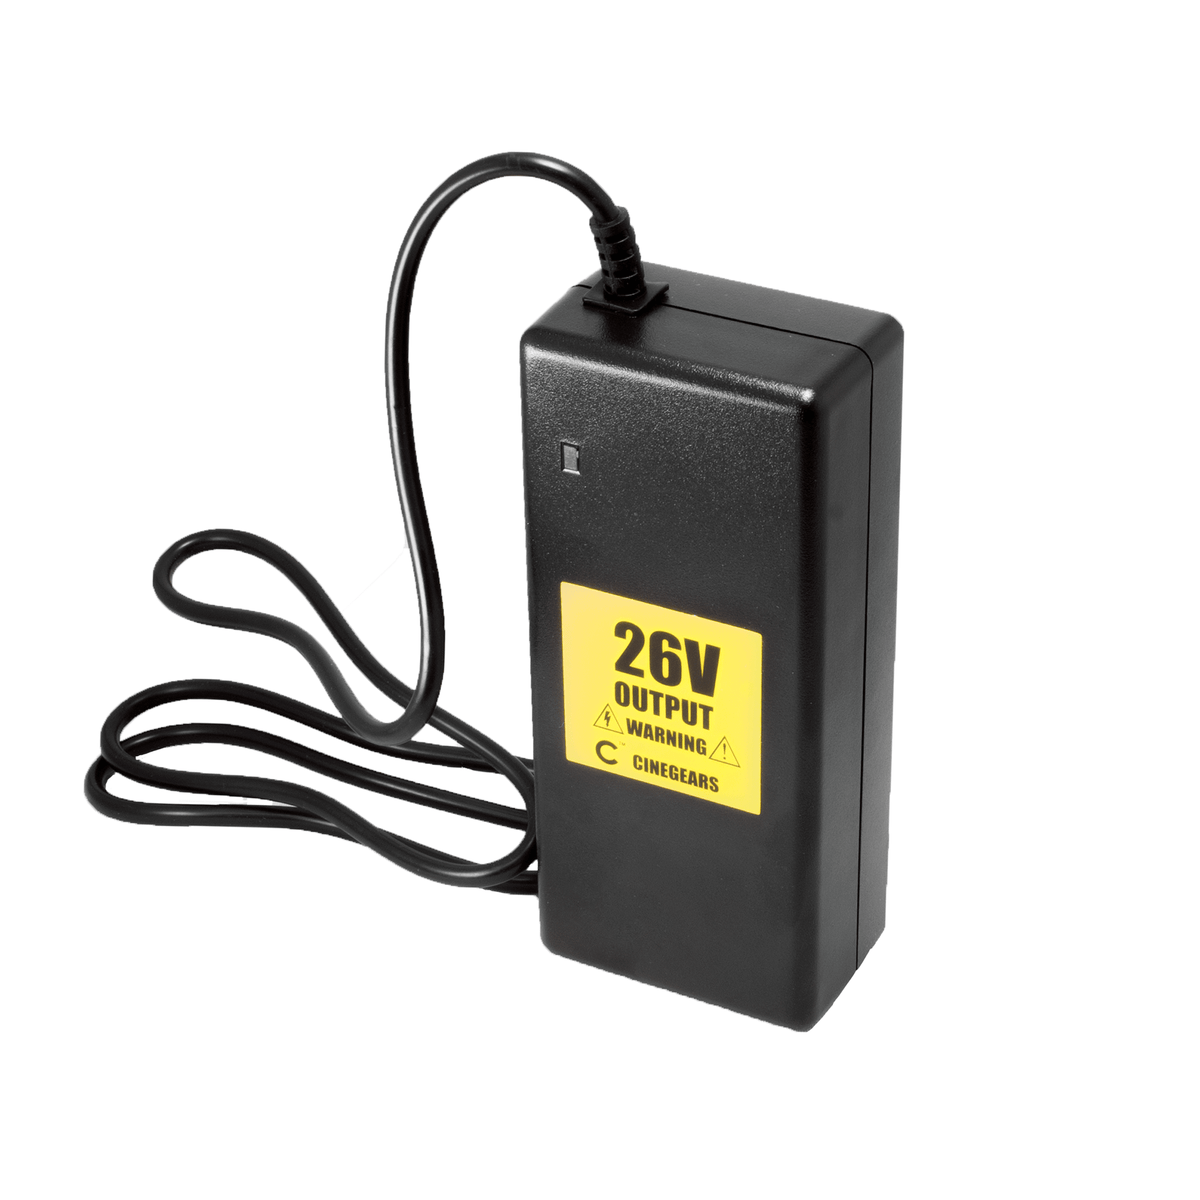 CINEGEARS 26V Production Battery Charger